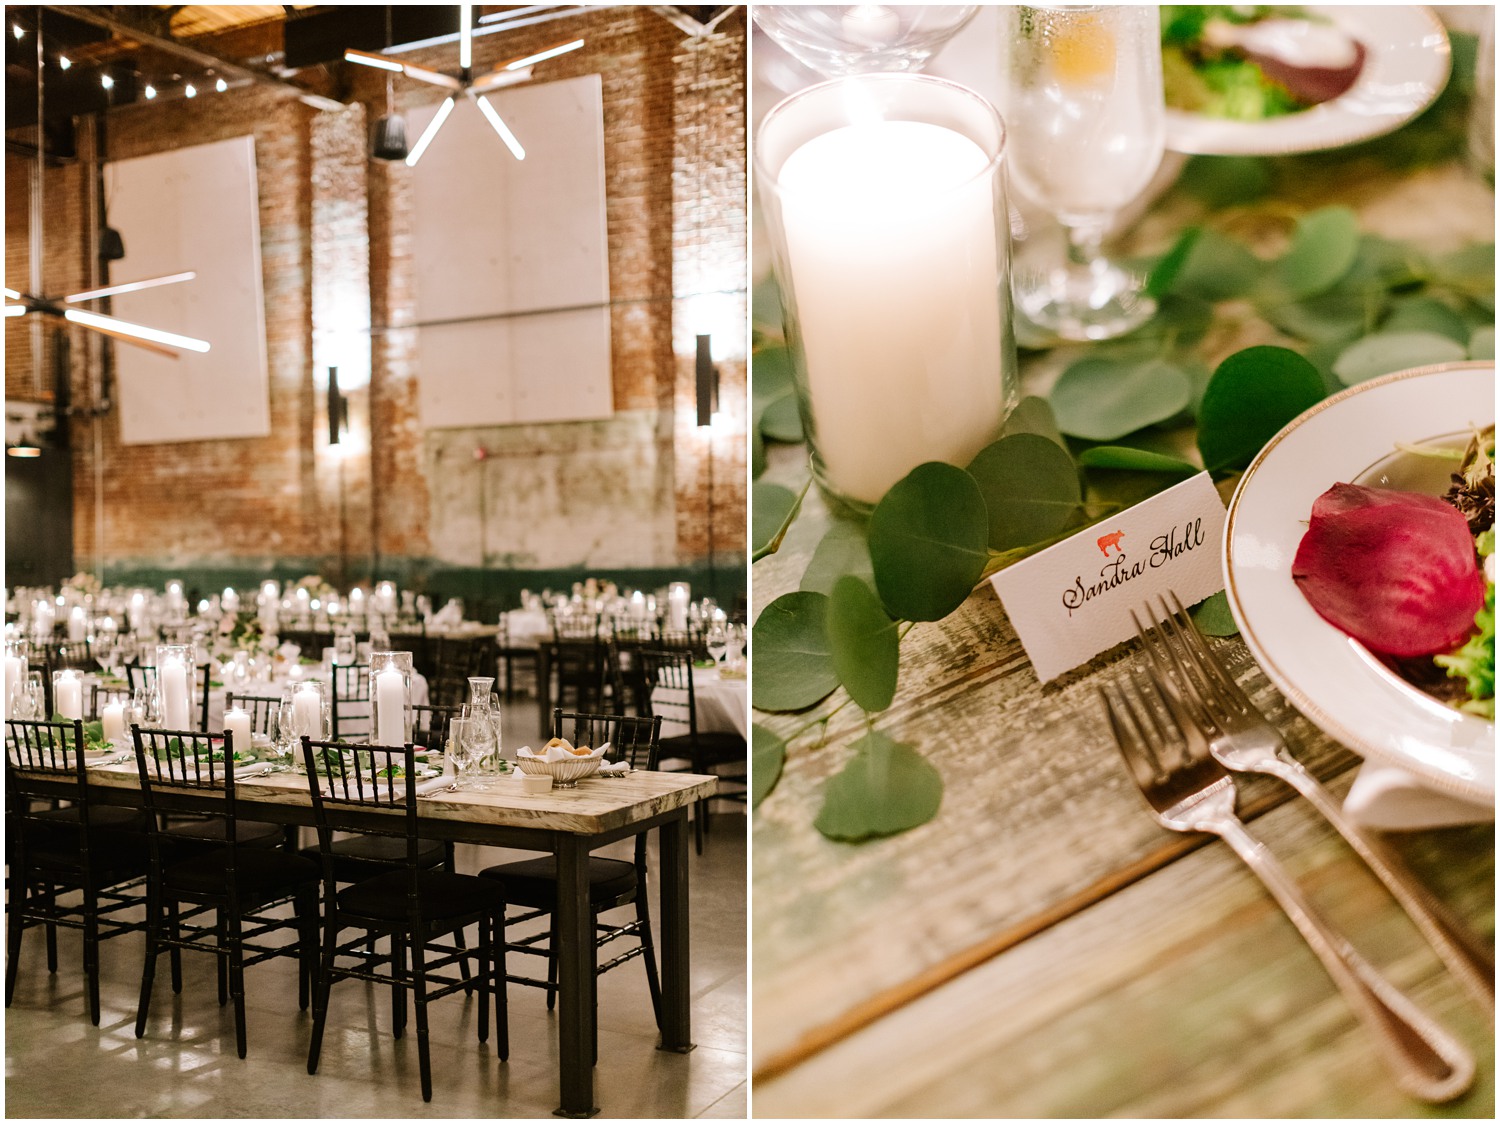 industrial inspired wedding details at the Cadillac Service Garage